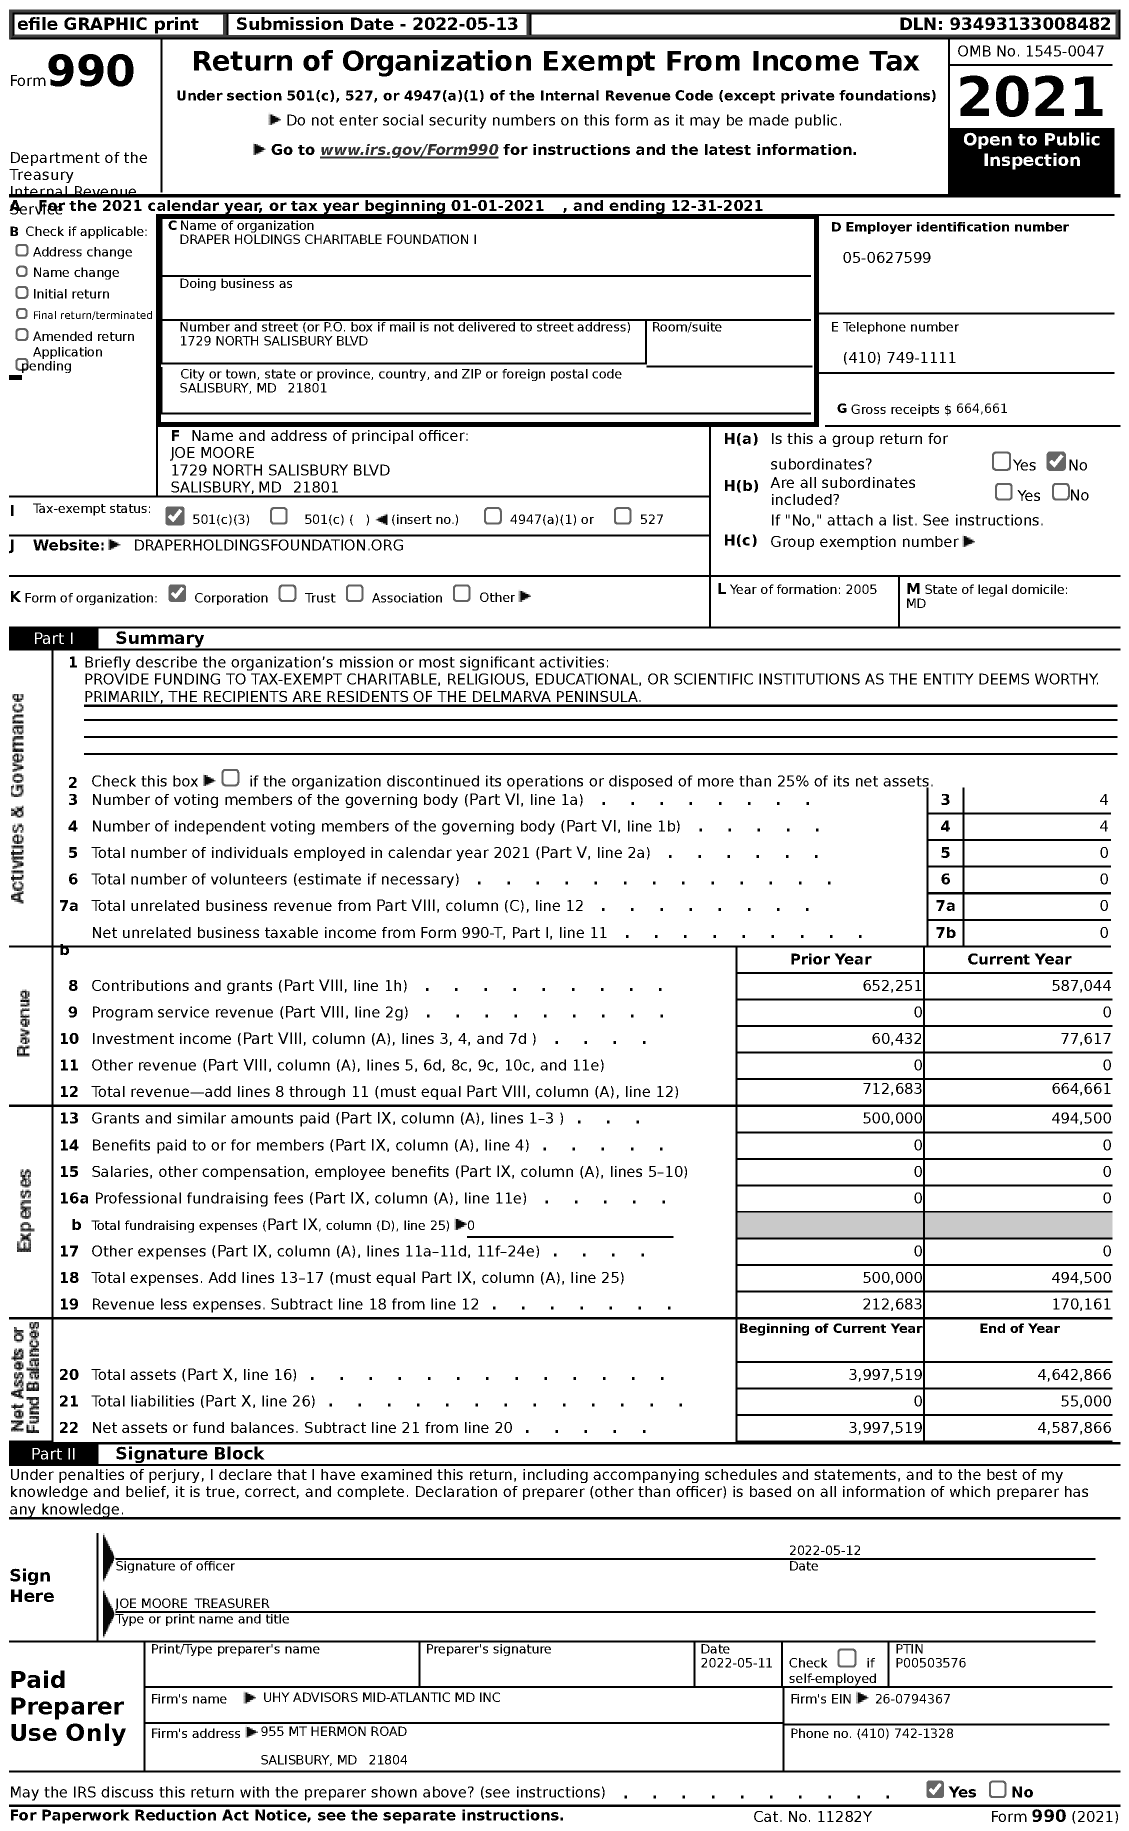 Image of first page of 2021 Form 990 for Draper Holdings Charitable Foundation I